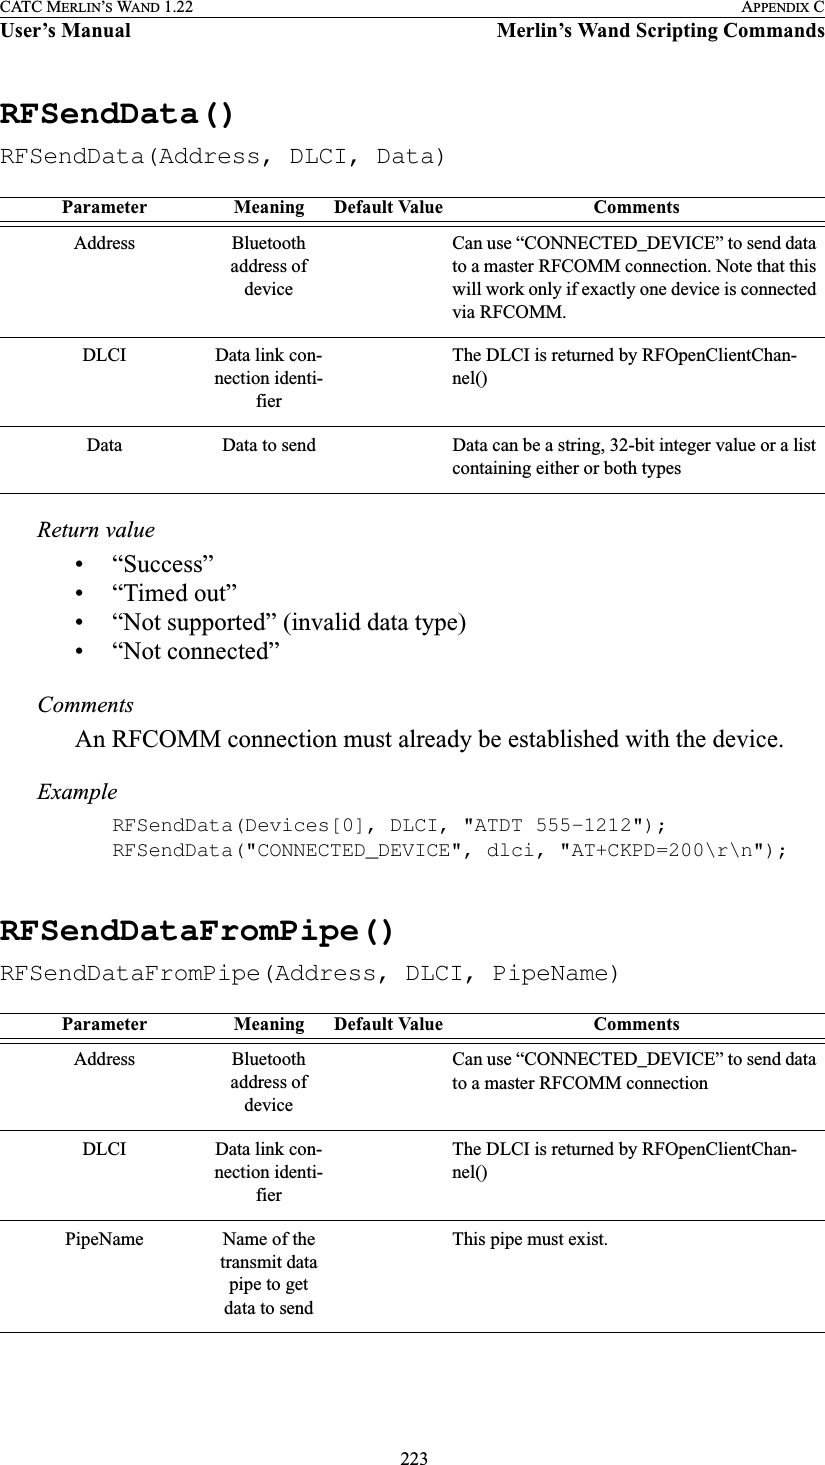  223CATC MERLIN’S WAND 1.22 APPENDIX CUser’s Manual Merlin’s Wand Scripting CommandsRFSendData()RFSendData(Address, DLCI, Data)Return value• “Success”• “Timed out”• “Not supported” (invalid data type)• “Not connected”CommentsAn RFCOMM connection must already be established with the device.ExampleRFSendData(Devices[0], DLCI, &quot;ATDT 555-1212&quot;);RFSendData(&quot;CONNECTED_DEVICE&quot;, dlci, &quot;AT+CKPD=200\r\n&quot;);RFSendDataFromPipe()RFSendDataFromPipe(Address, DLCI, PipeName)Parameter Meaning Default Value CommentsAddress Bluetooth address of device Can use “CONNECTED_DEVICE” to send data to a master RFCOMM connection. Note that this will work only if exactly one device is connected via RFCOMM.DLCI Data link con-nection identi-fierThe DLCI is returned by RFOpenClientChan-nel()Data Data to send Data can be a string, 32-bit integer value or a list containing either or both typesParameter Meaning Default Value CommentsAddress Bluetooth address of device Can use “CONNECTED_DEVICE” to send data to a master RFCOMM connectionDLCI Data link con-nection identi-fierThe DLCI is returned by RFOpenClientChan-nel()PipeName Name of the transmit data pipe to get data to sendThis pipe must exist.